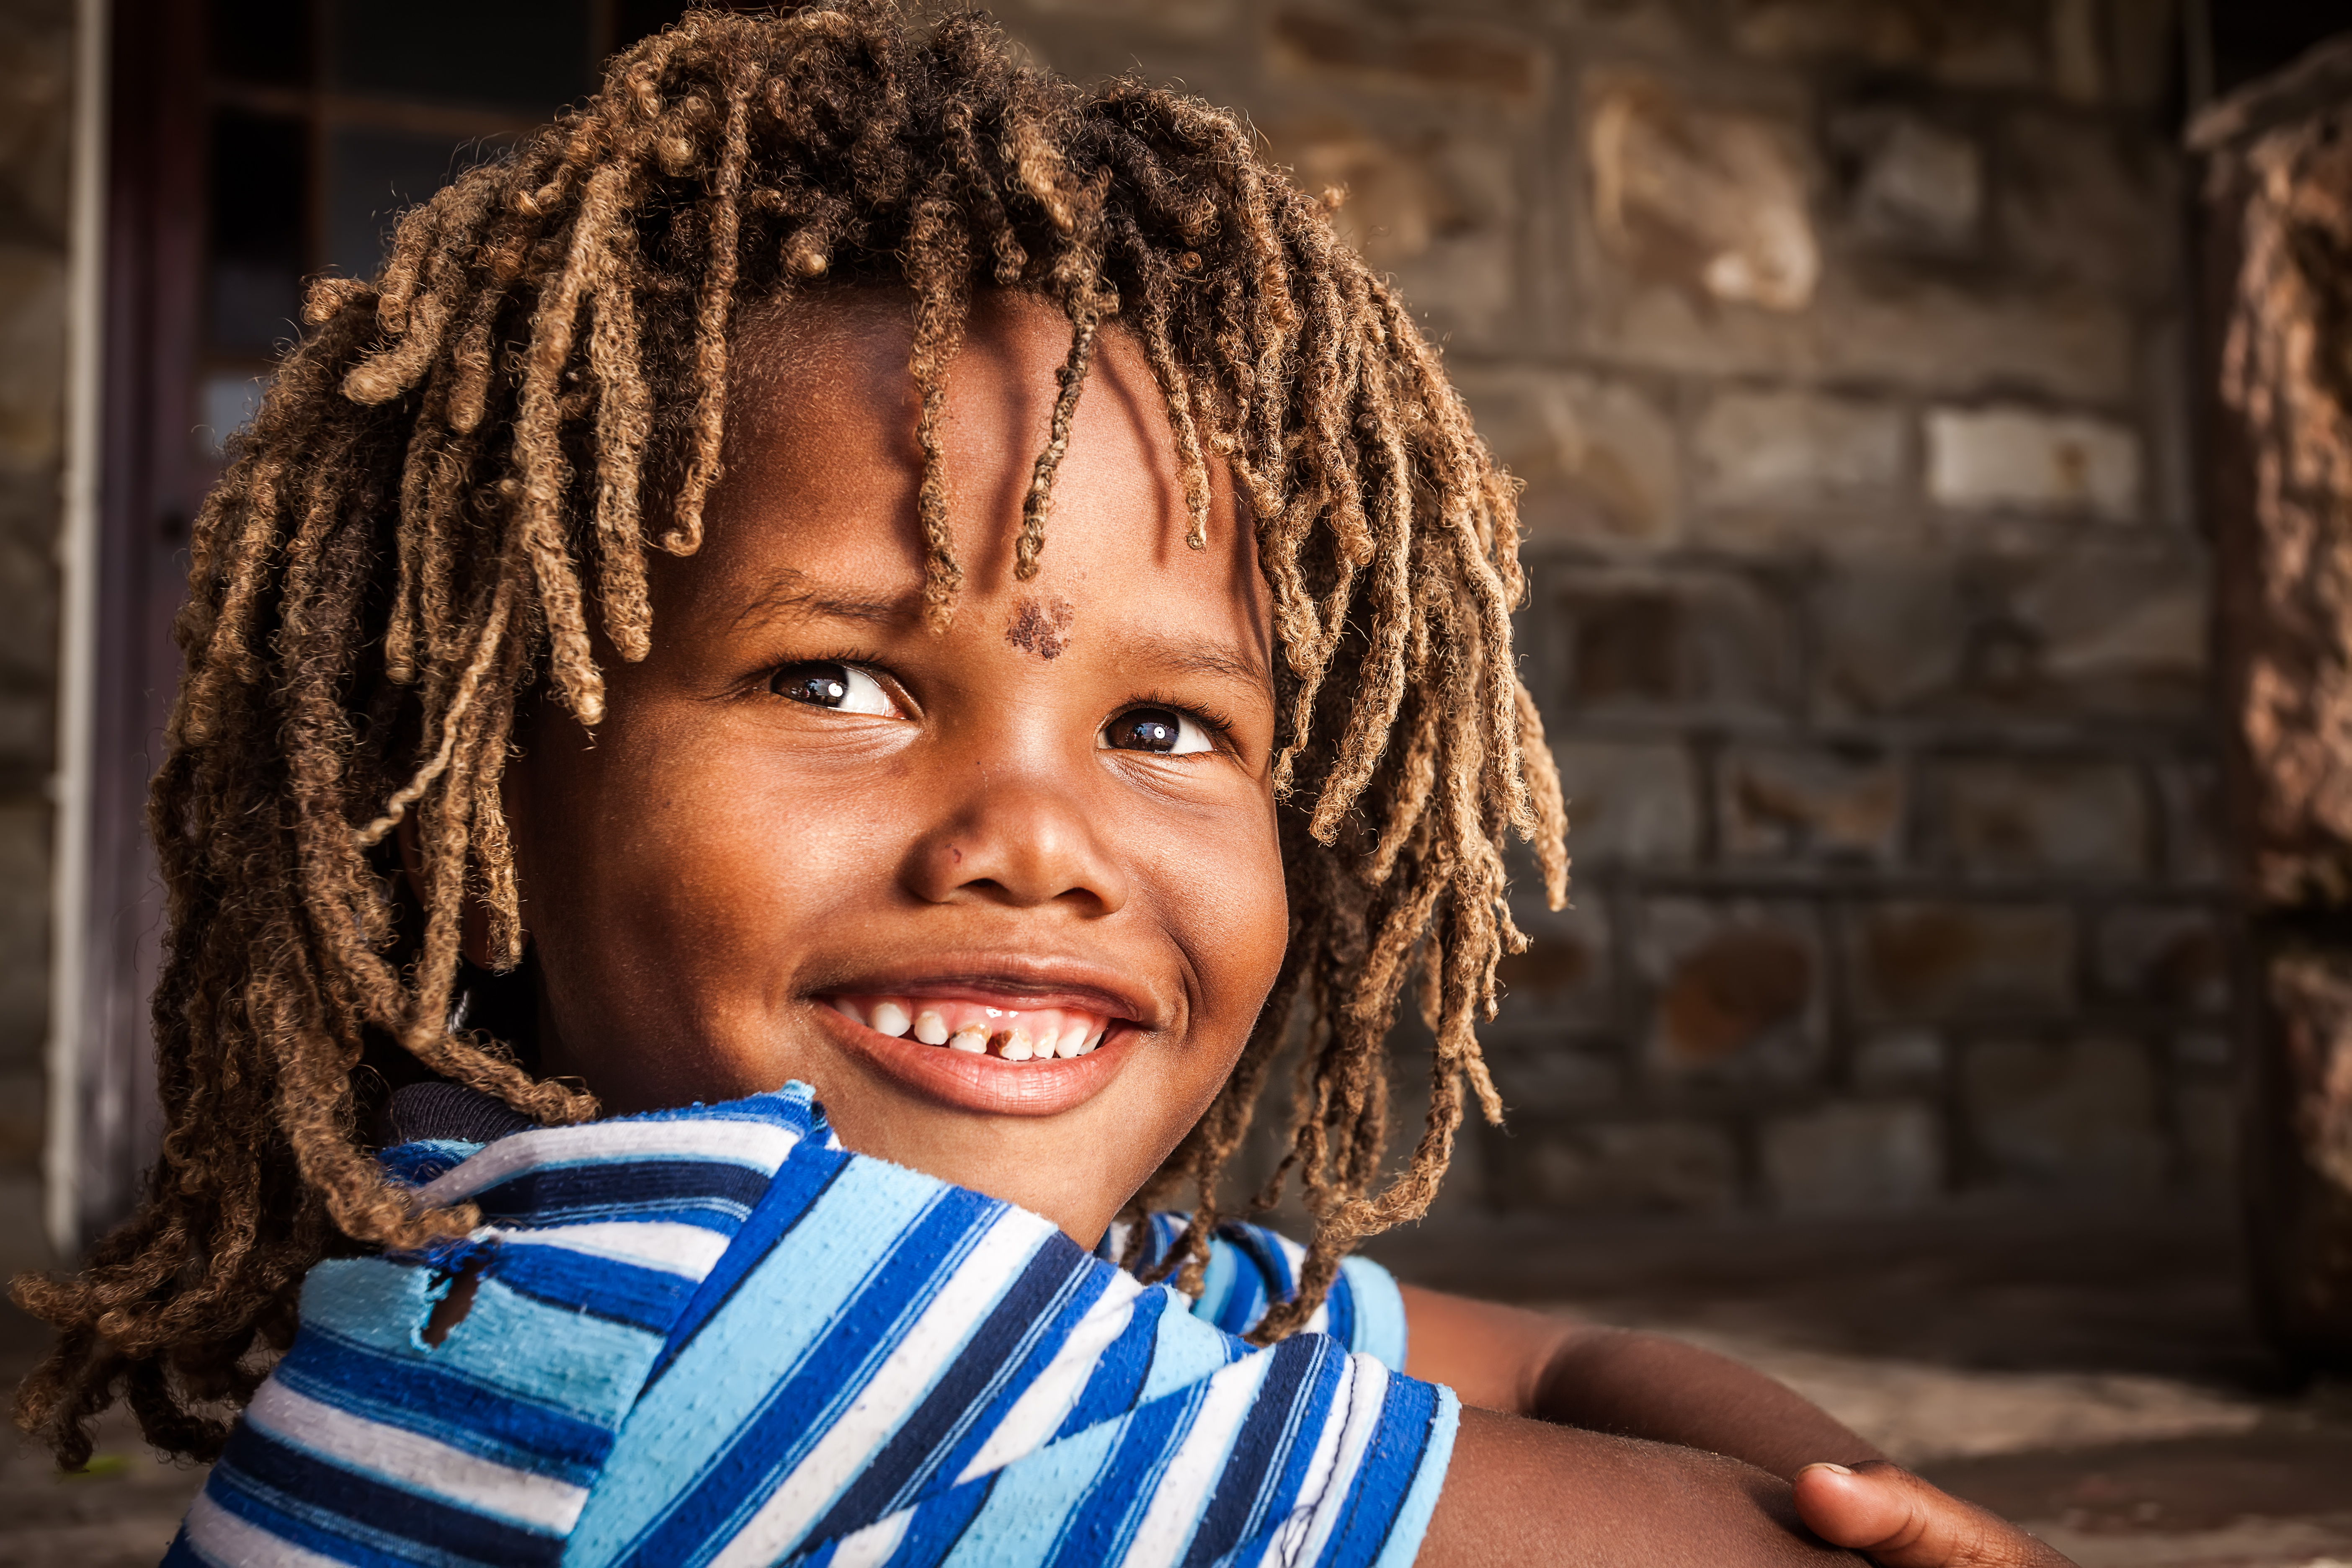 Young boy with locs